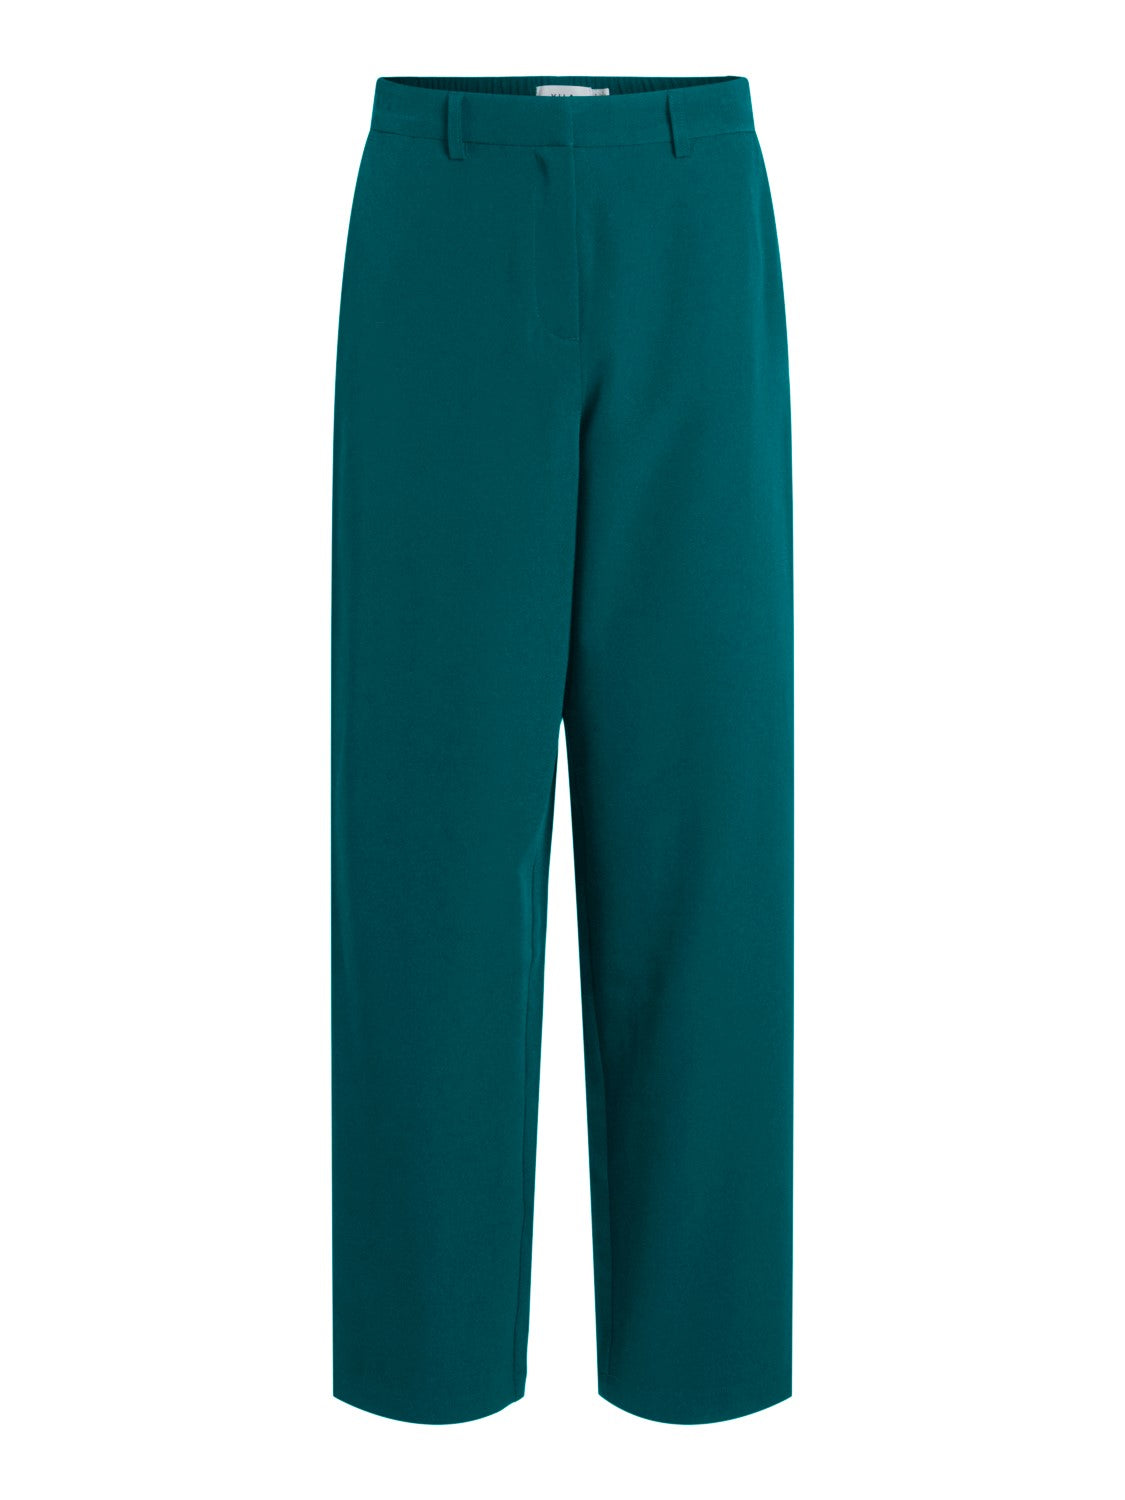 Kalra Trousers (Shaded Spruce)